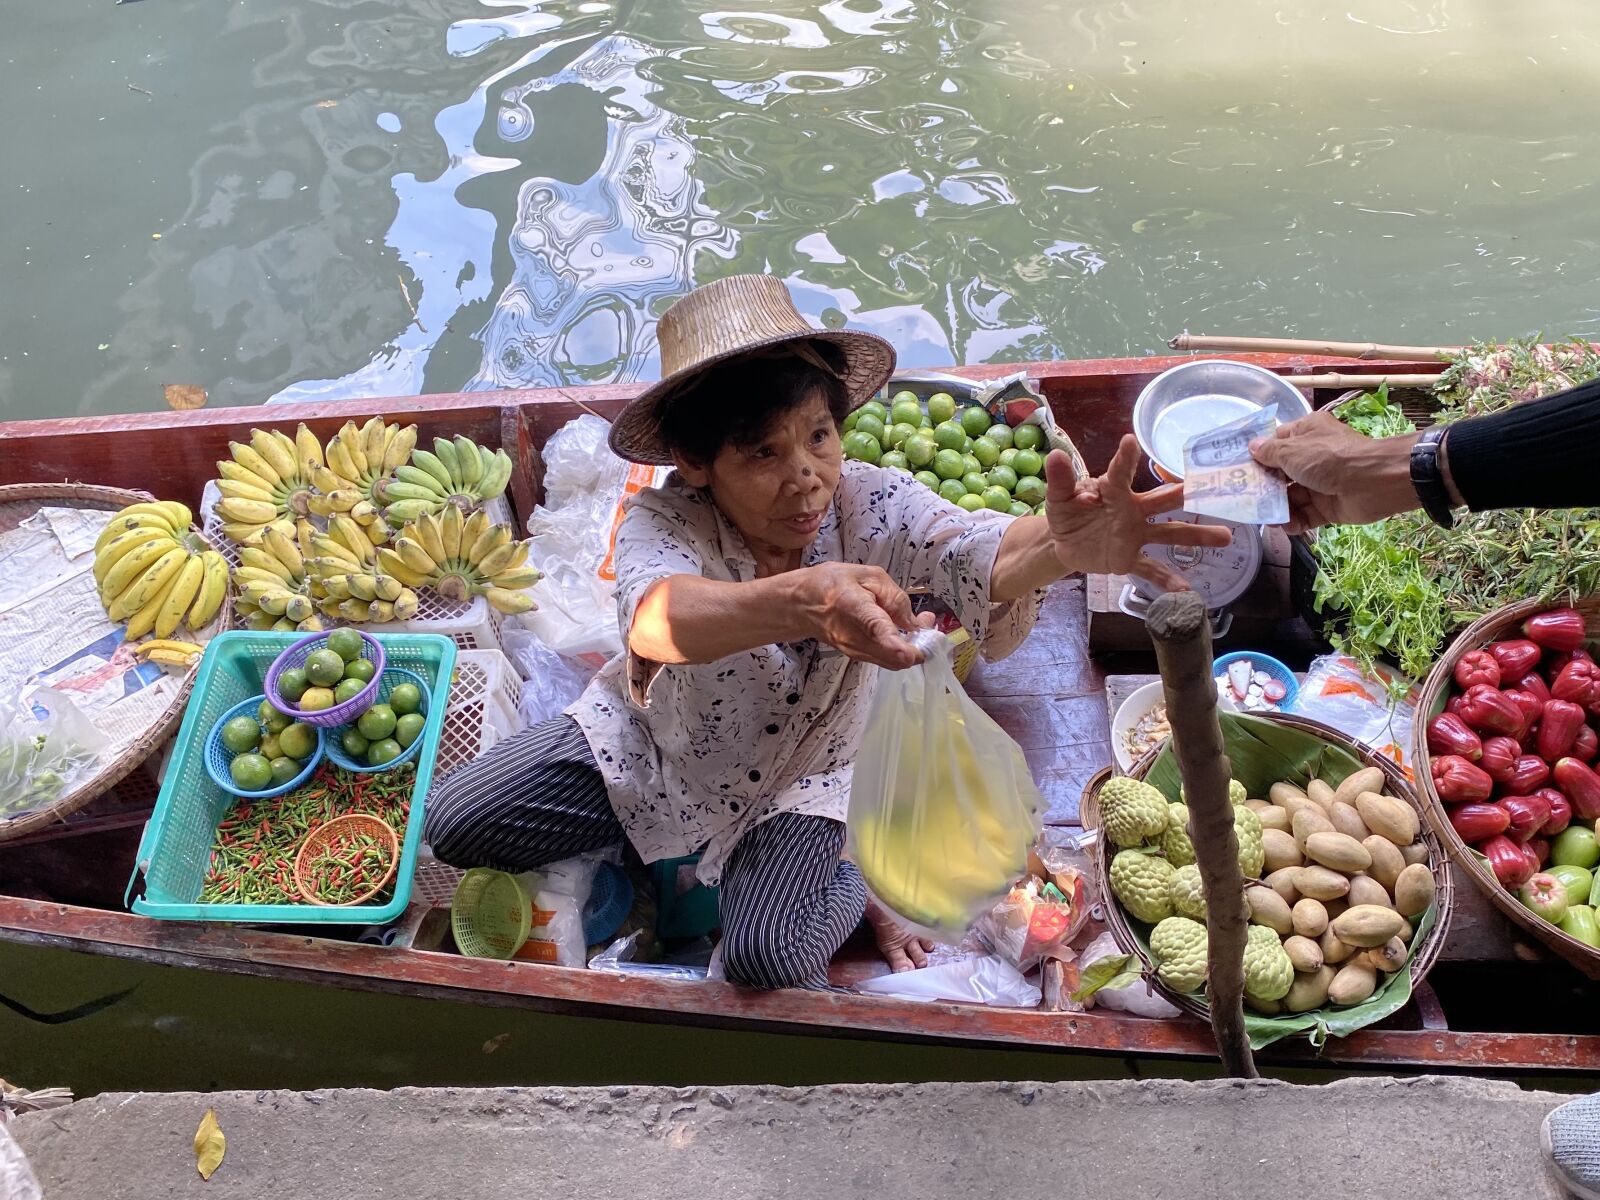 Apple iPhone 11 Pro + iPhone 11 Pro back triple camera 4.25mm f/1.8 sample photo. Woman, floating river, market photography